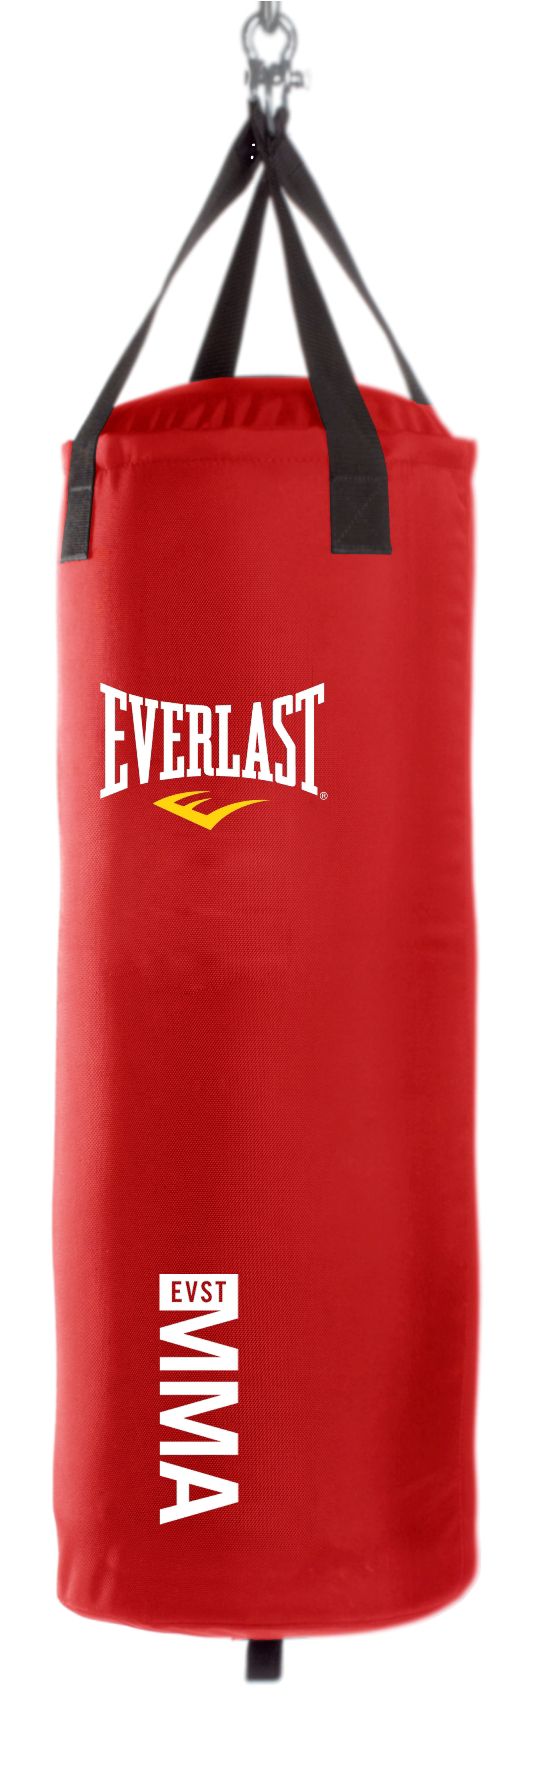 Cheap Price Everlast® MMA Polycanvas 70lb Heavy Bag Red - Boxing Equipment Reviews